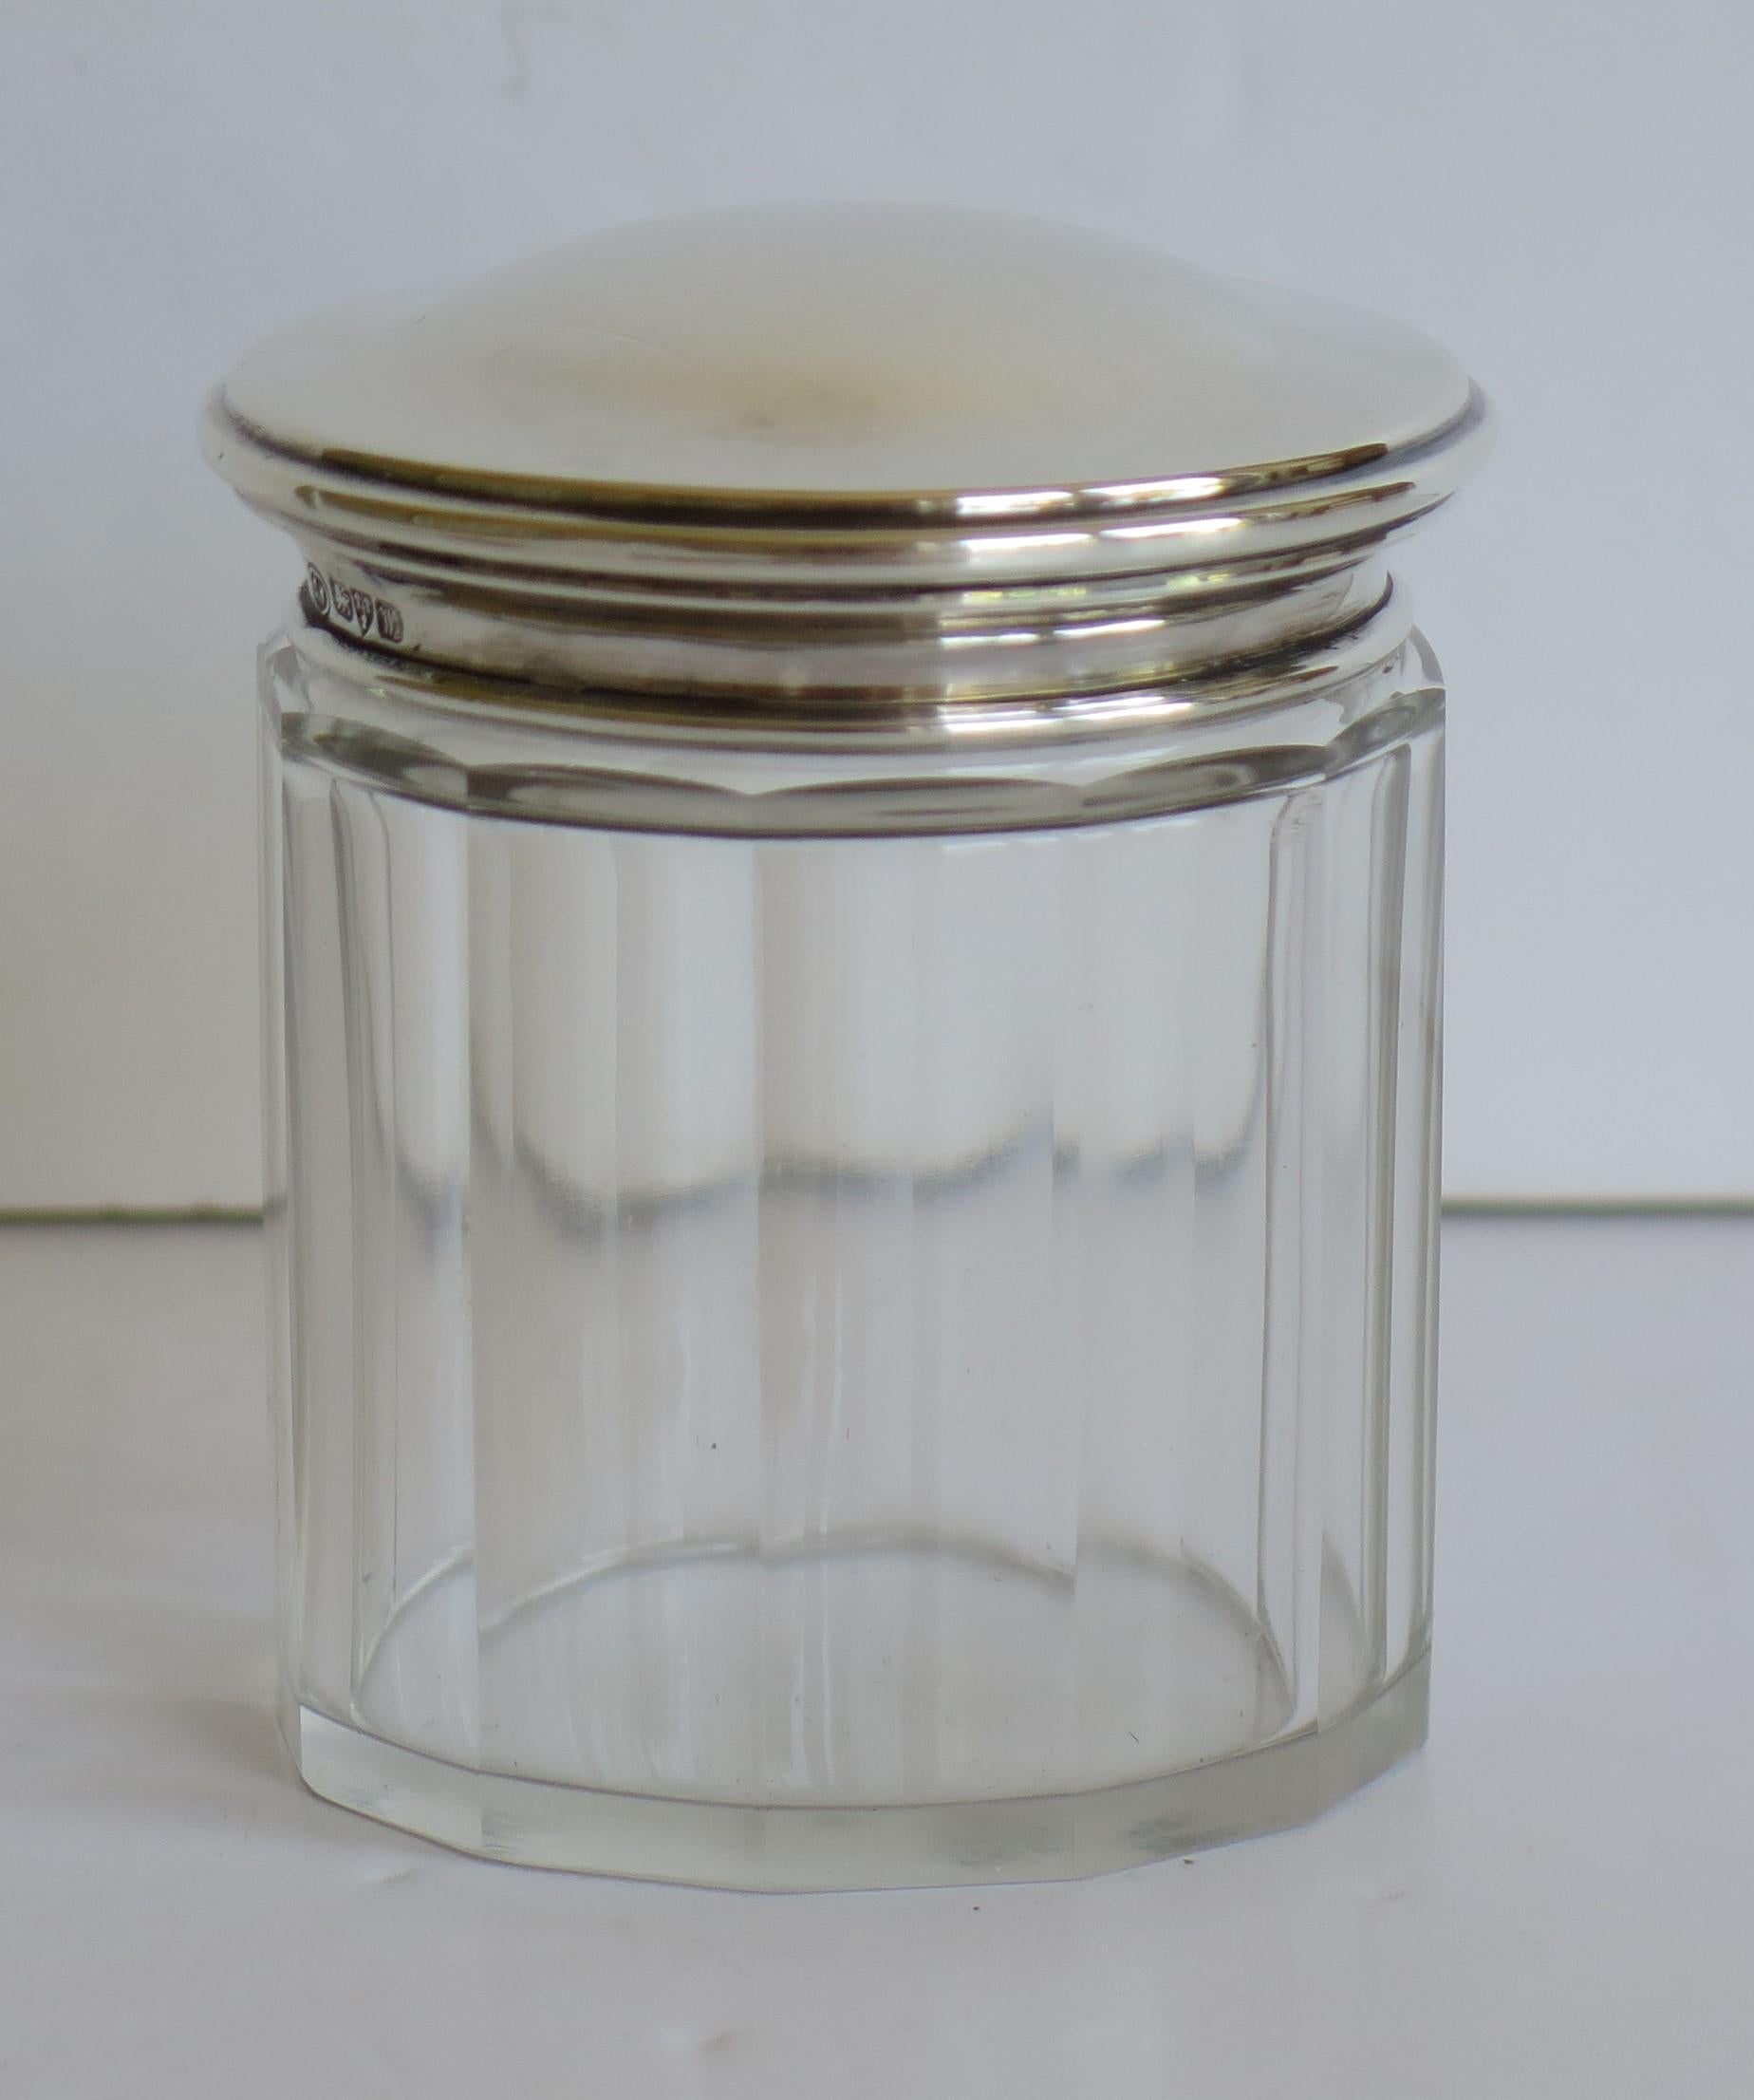 Art Deco Crystal Cut Glass Jar with Sterling Silver Top by Owen Williams, Chester, 1922